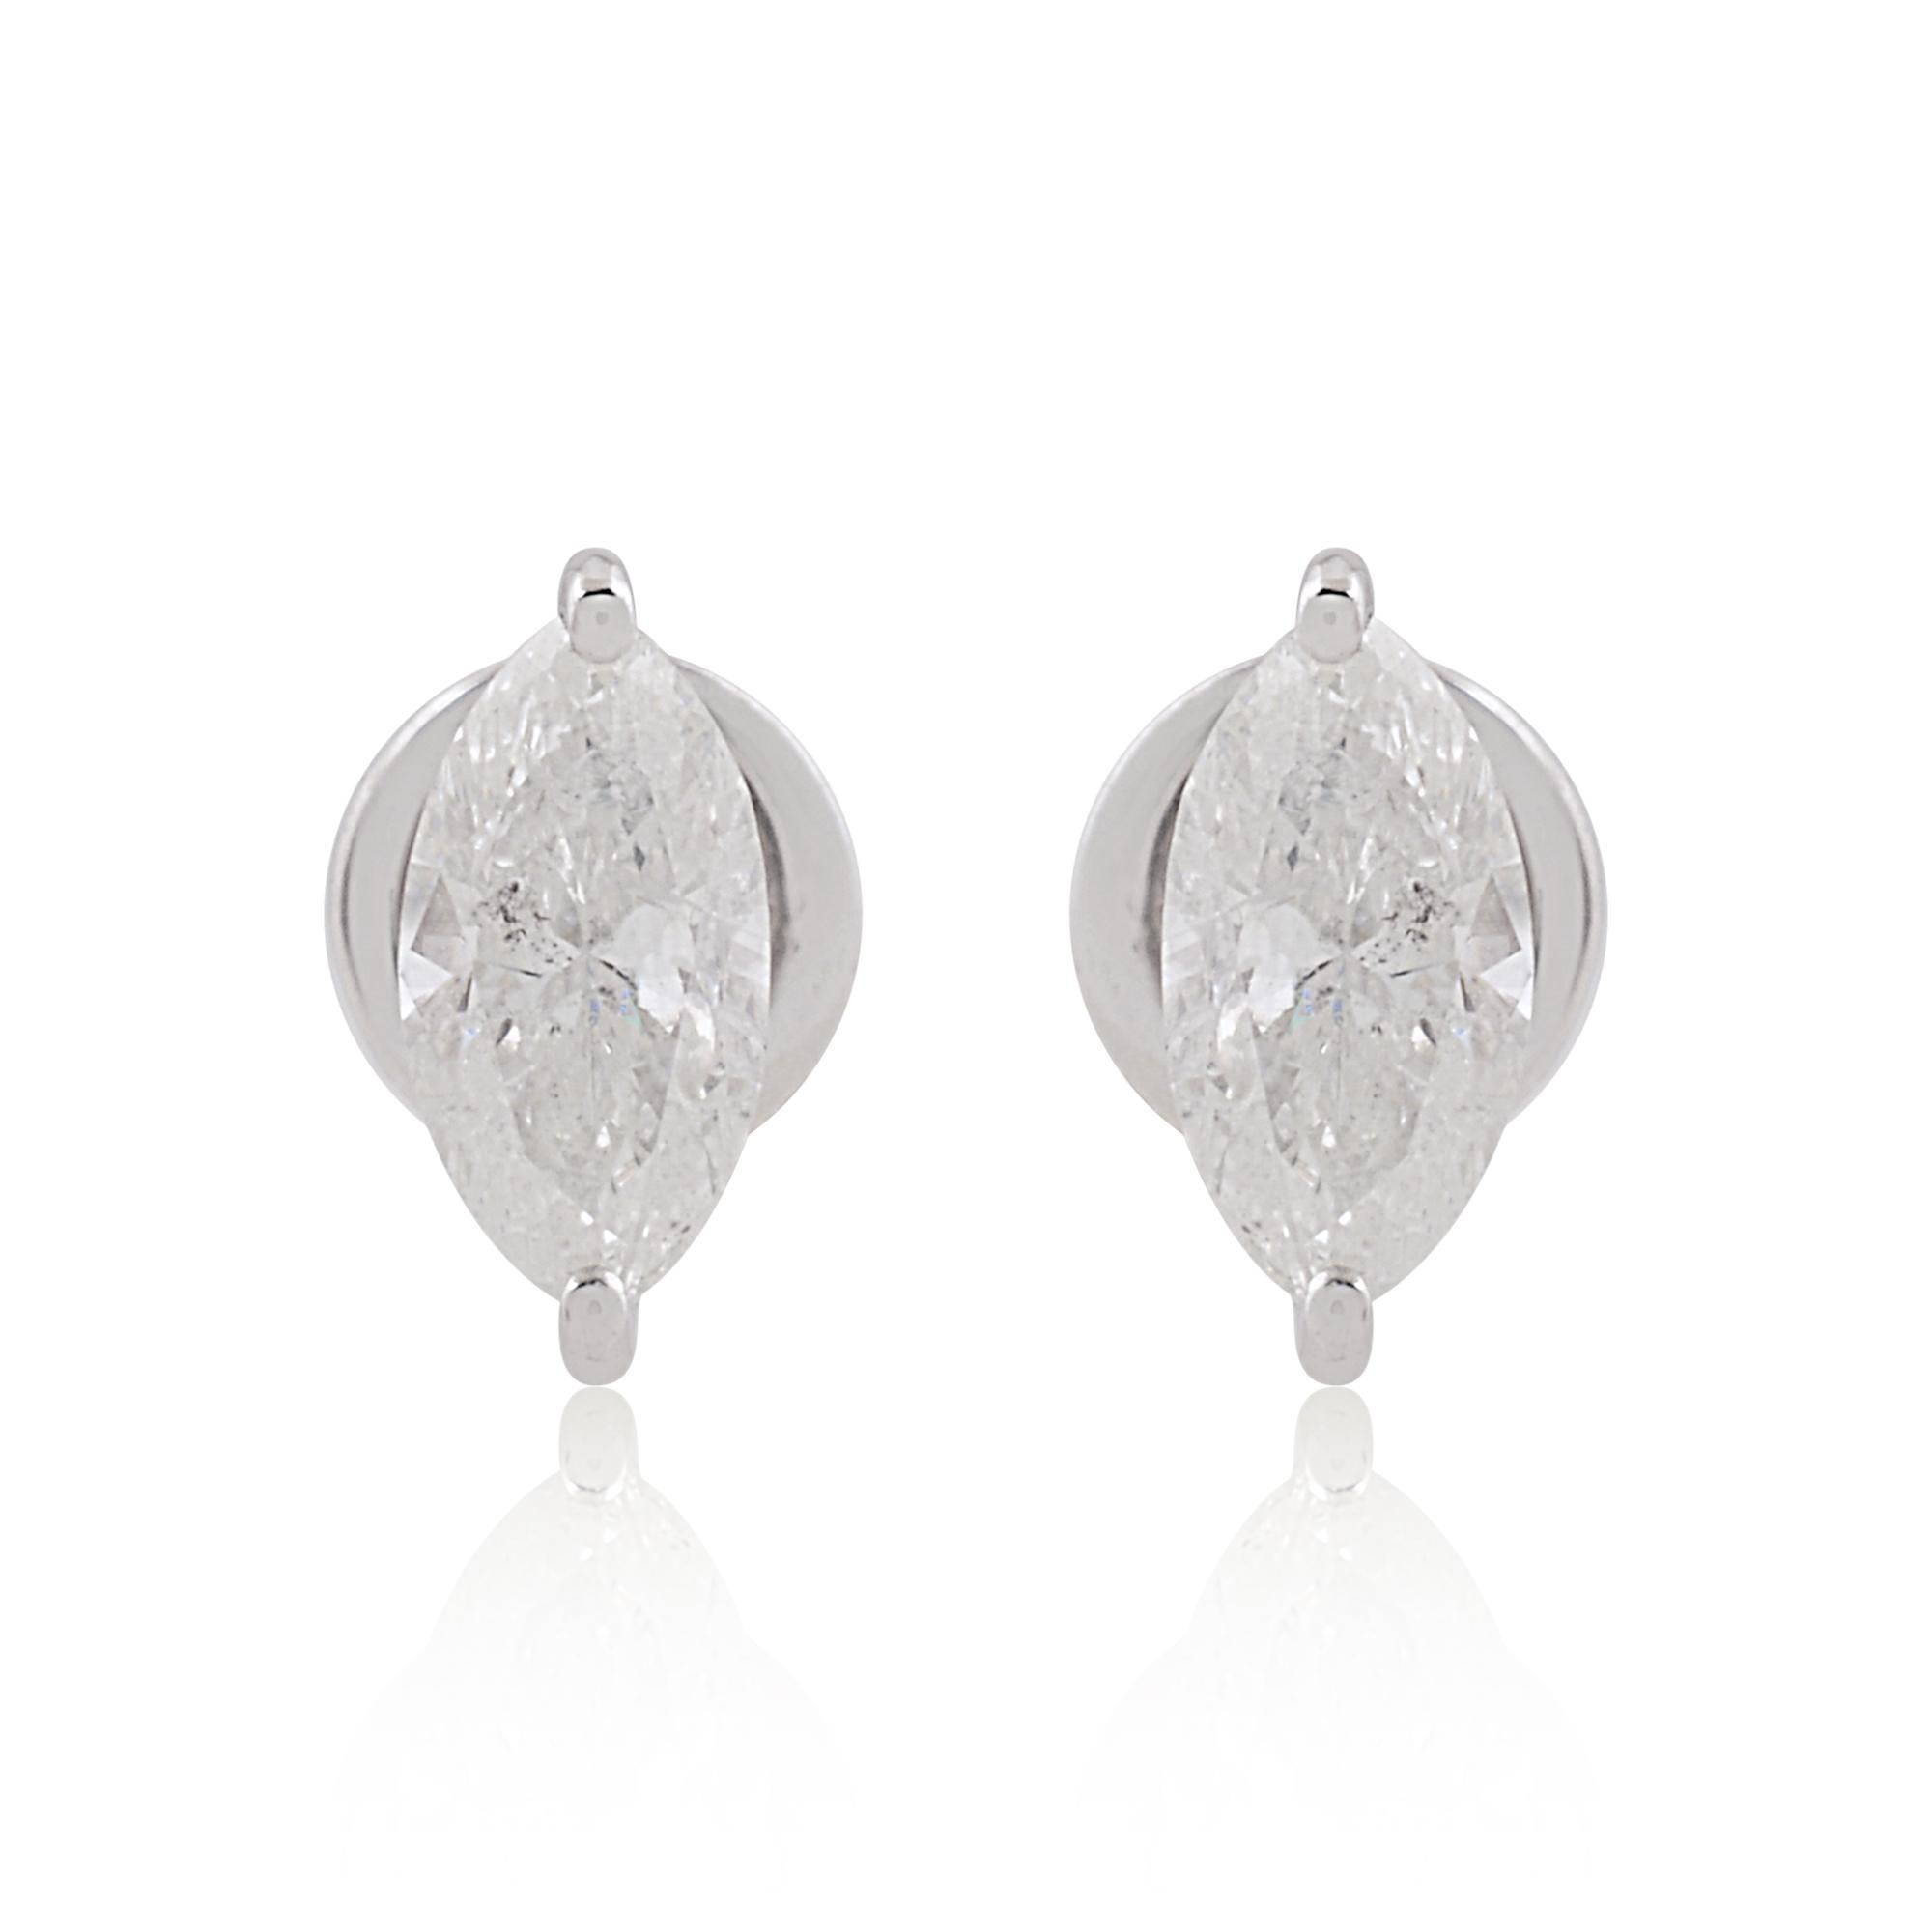 Set in solid 10k white gold, the minimalist design of these earrings allows the diamonds to take center stage, while the sleek and polished setting adds a touch of modern sophistication. The secure post and butterfly backings ensure comfortable and